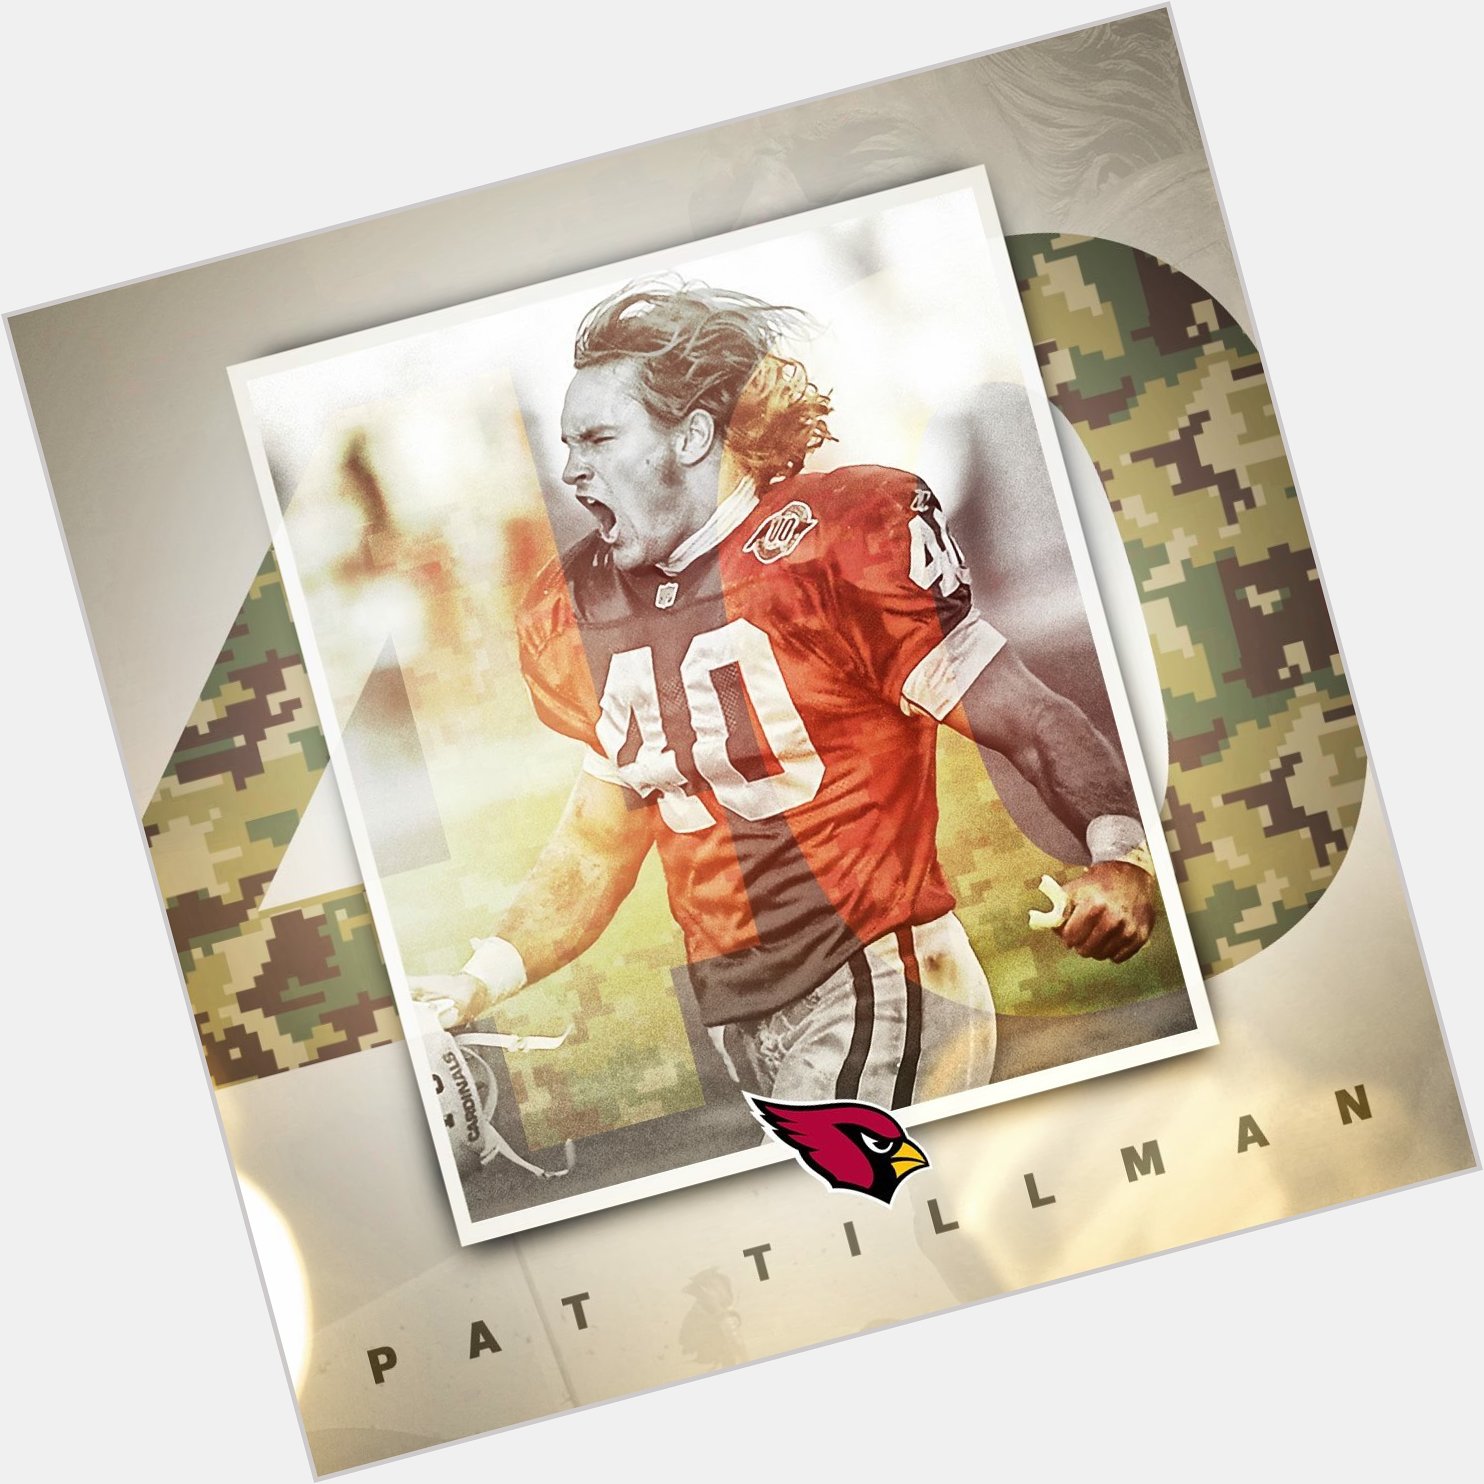 Happy Birthday Pat Tillman, you were an admirable man for so many reasons... 